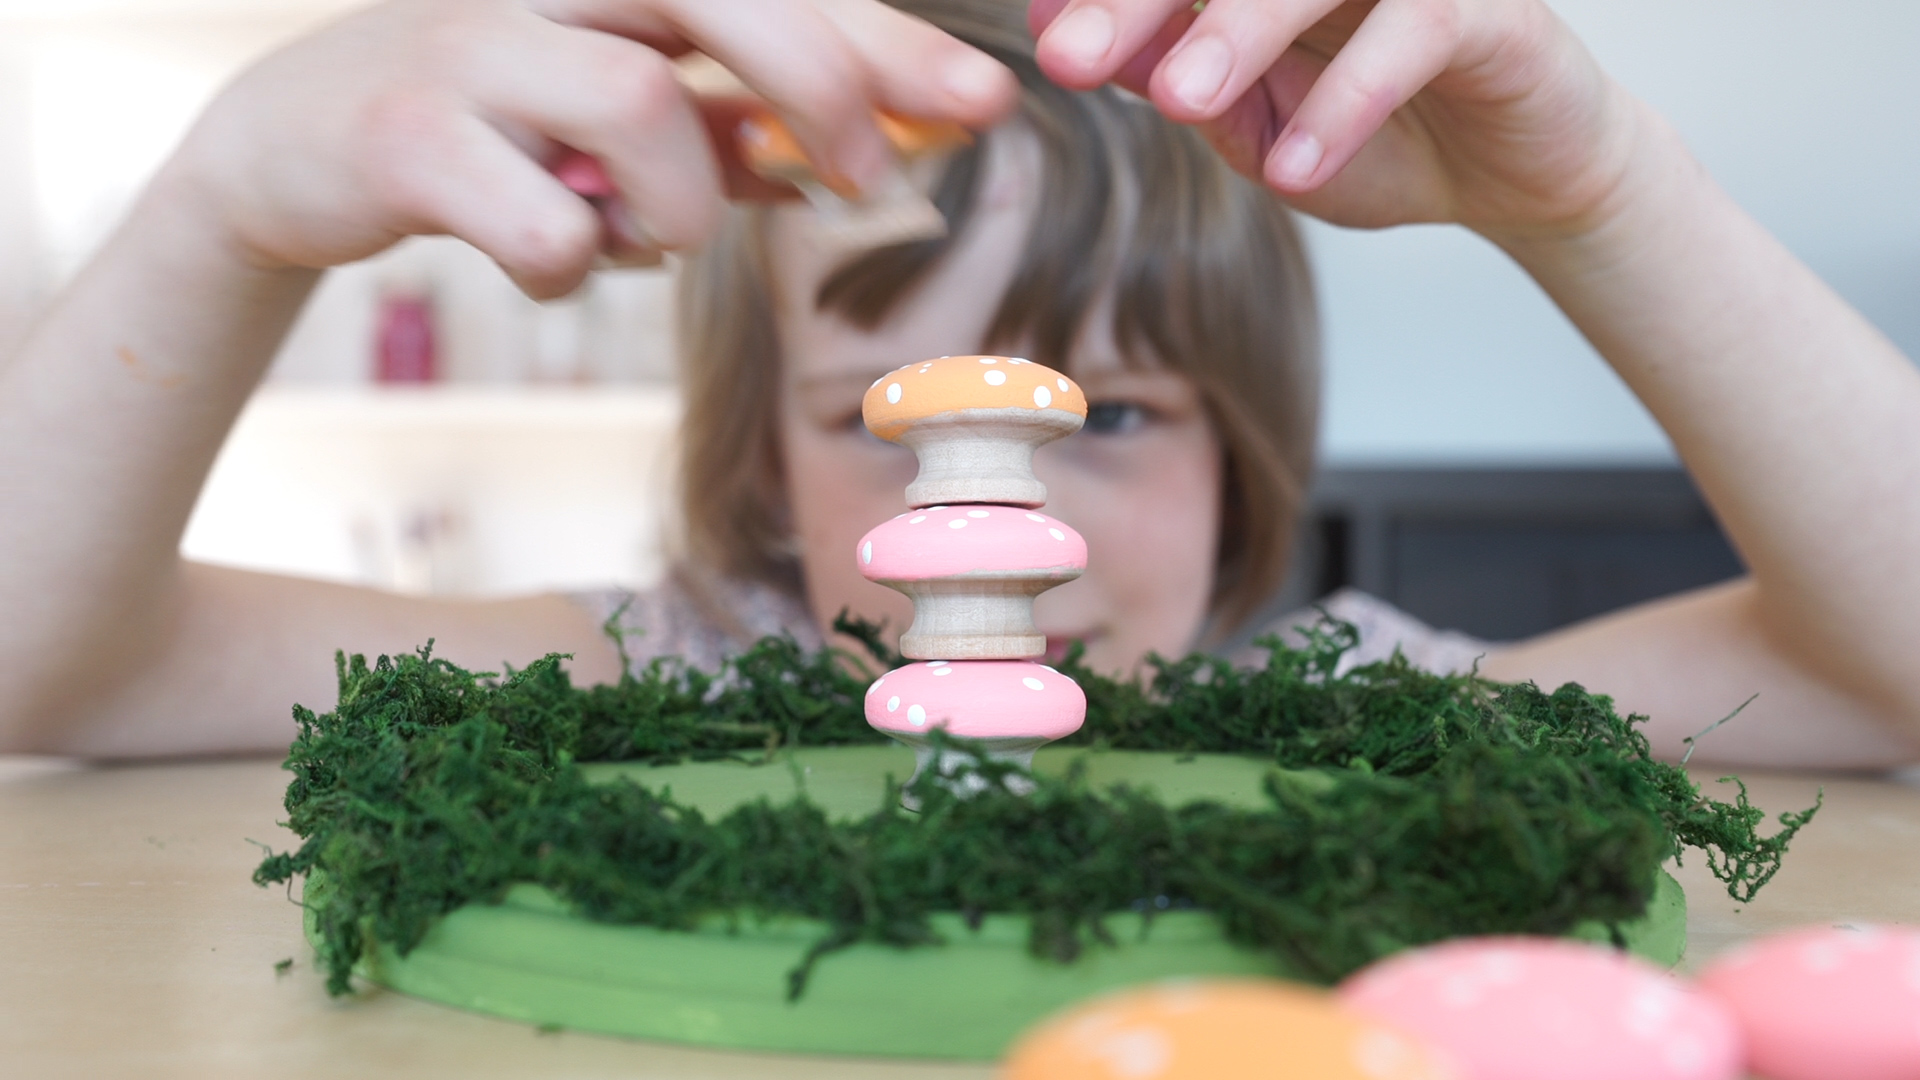 Make mushrooms for learning & play: 1) Sorting by Attributes (size, greater than/less than & colour), 2) Creating letters, 3) Counting/Adding (One-to-one correspondence, Perceptual Subsitizing, Perceptual subitizing) 4) Patterning 5) Tic-tac-toe 6) Stacking etc.